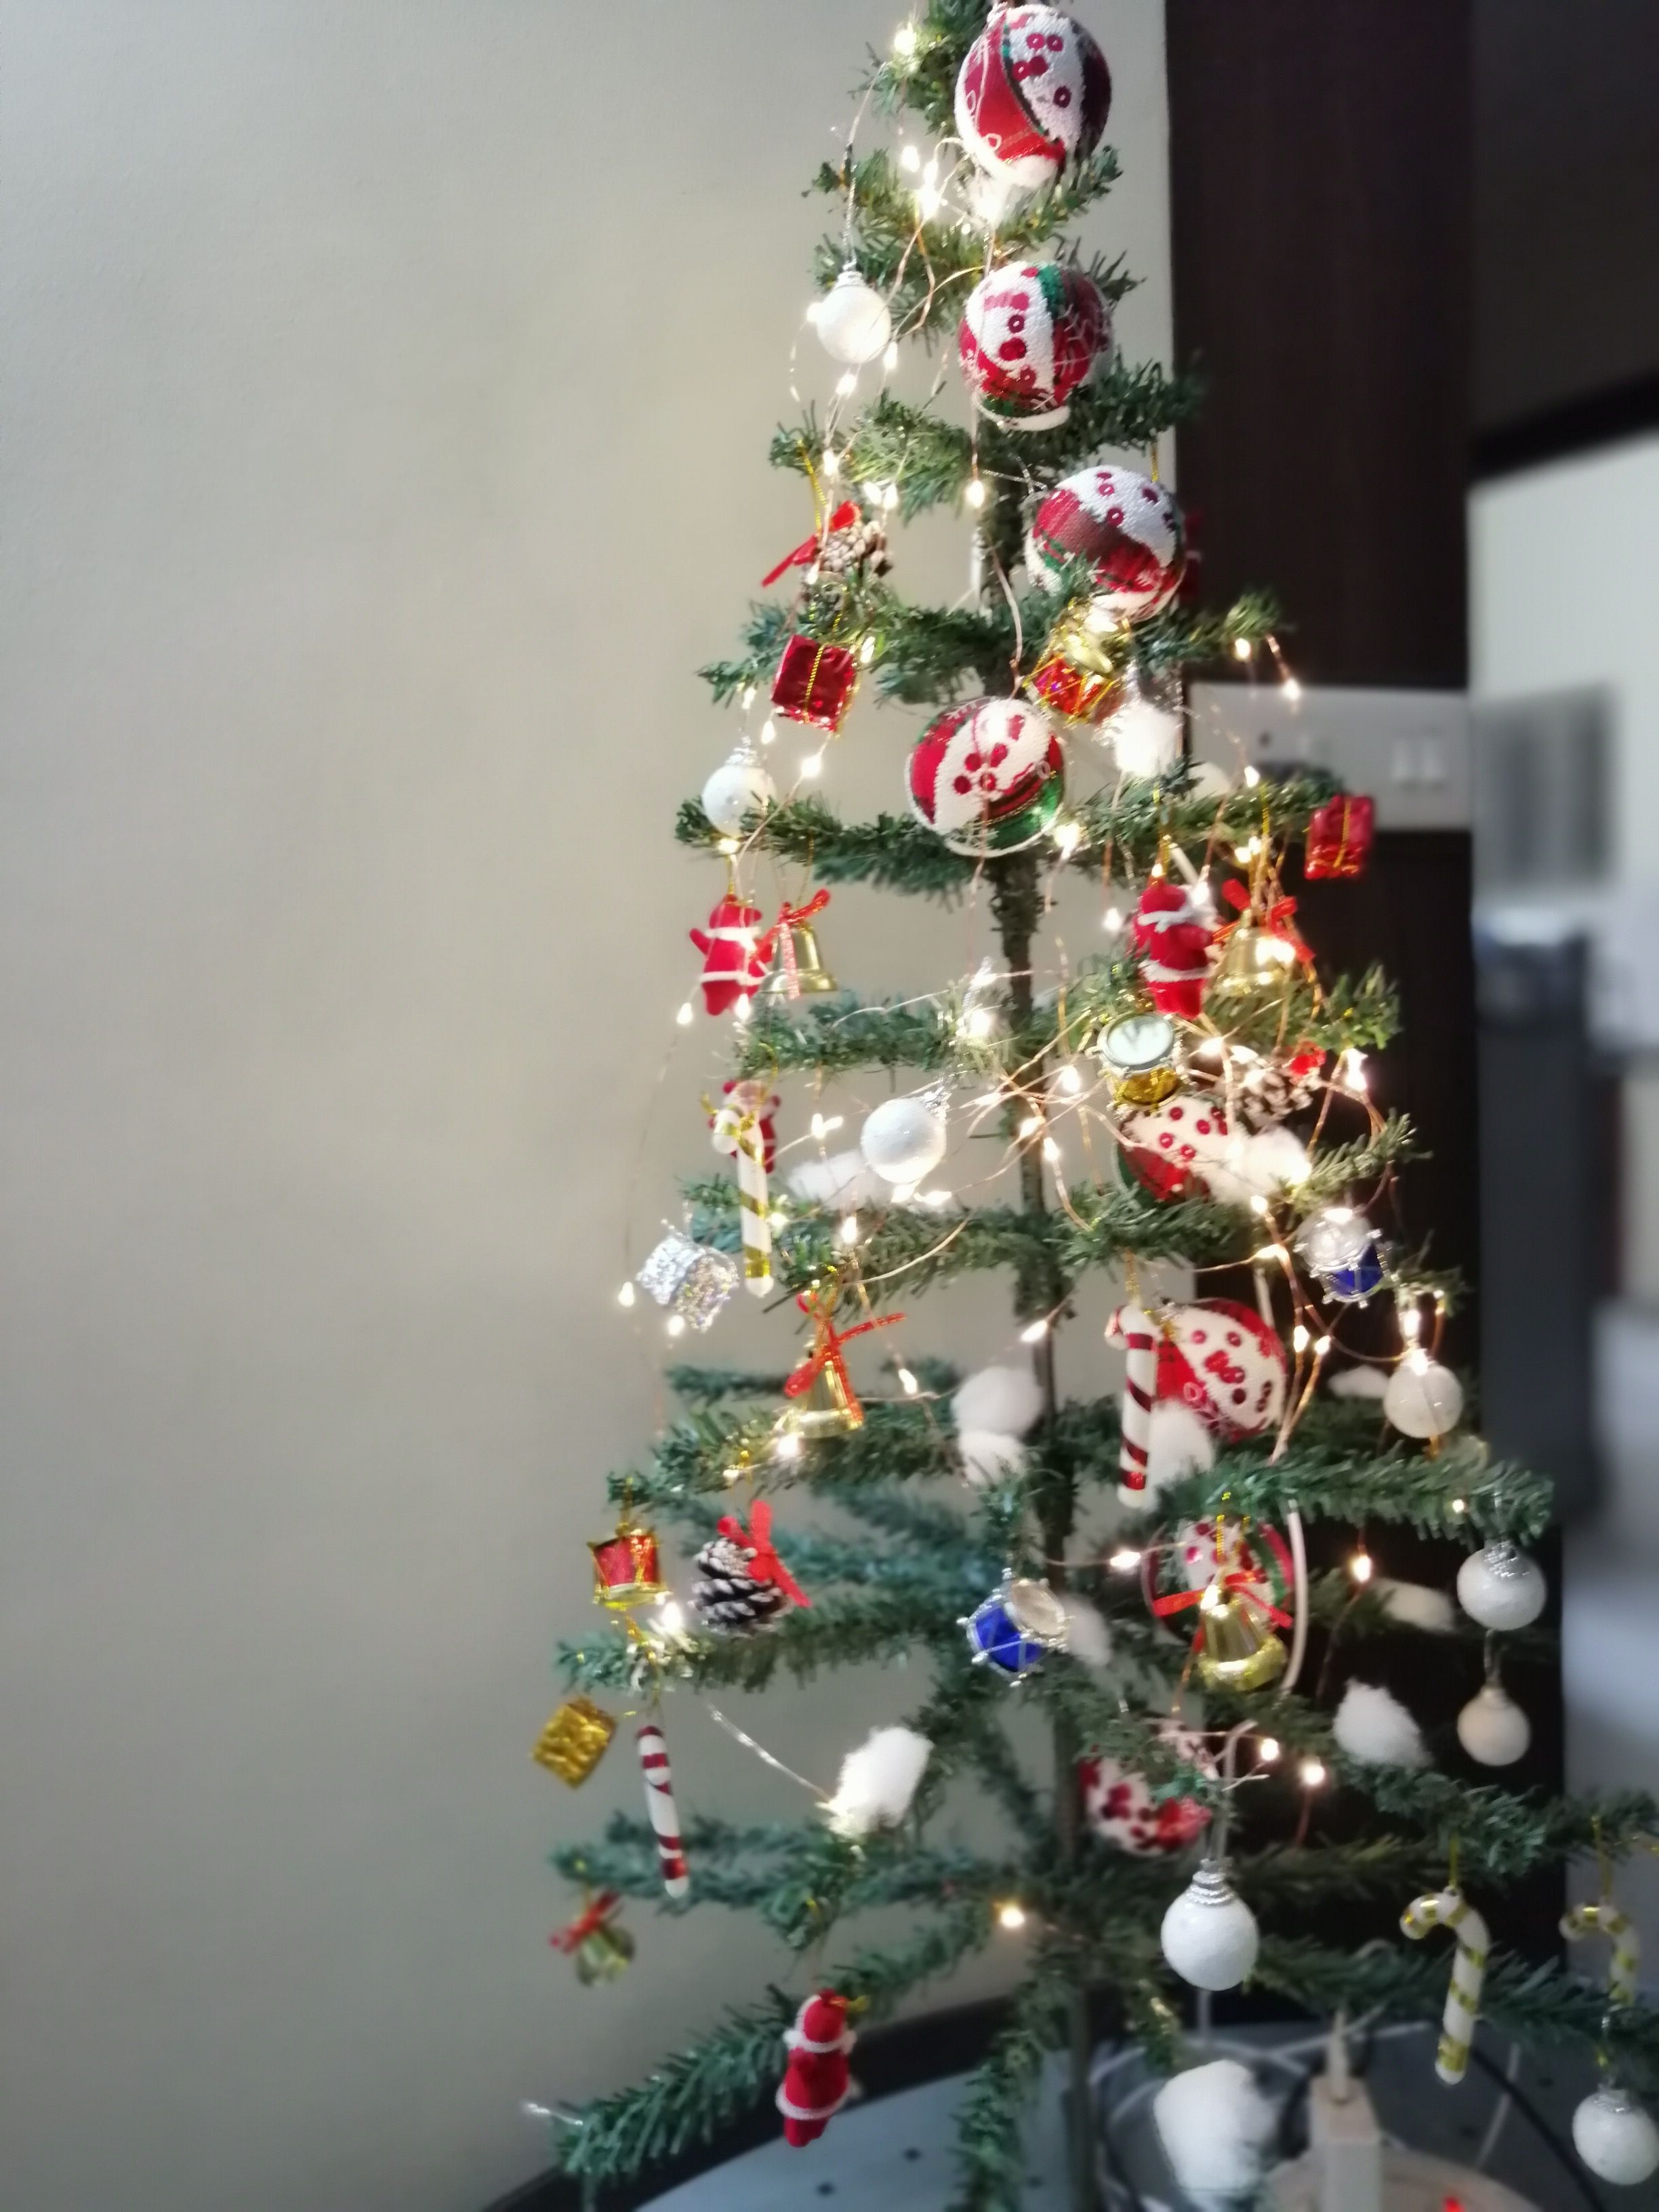 Christmas tree in my home